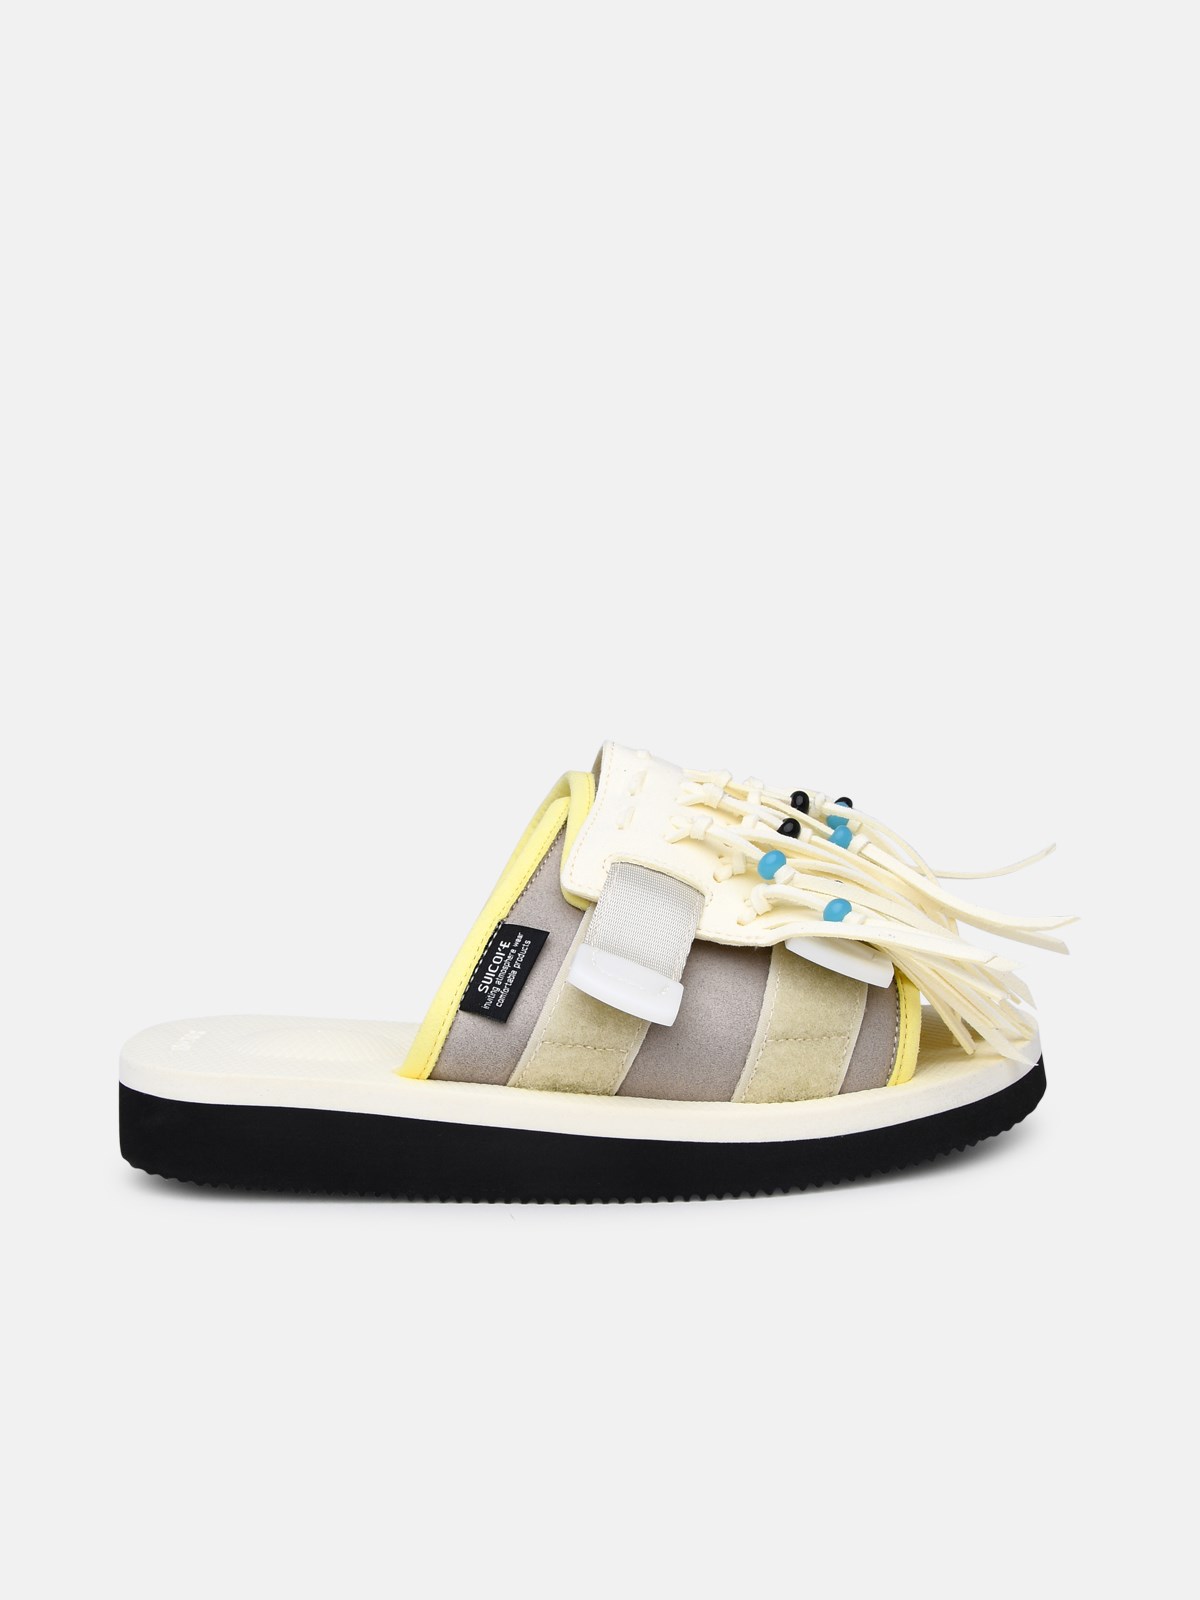 Suicoke Hoto Cab Slipper In Ivory Synthetic Leather In White